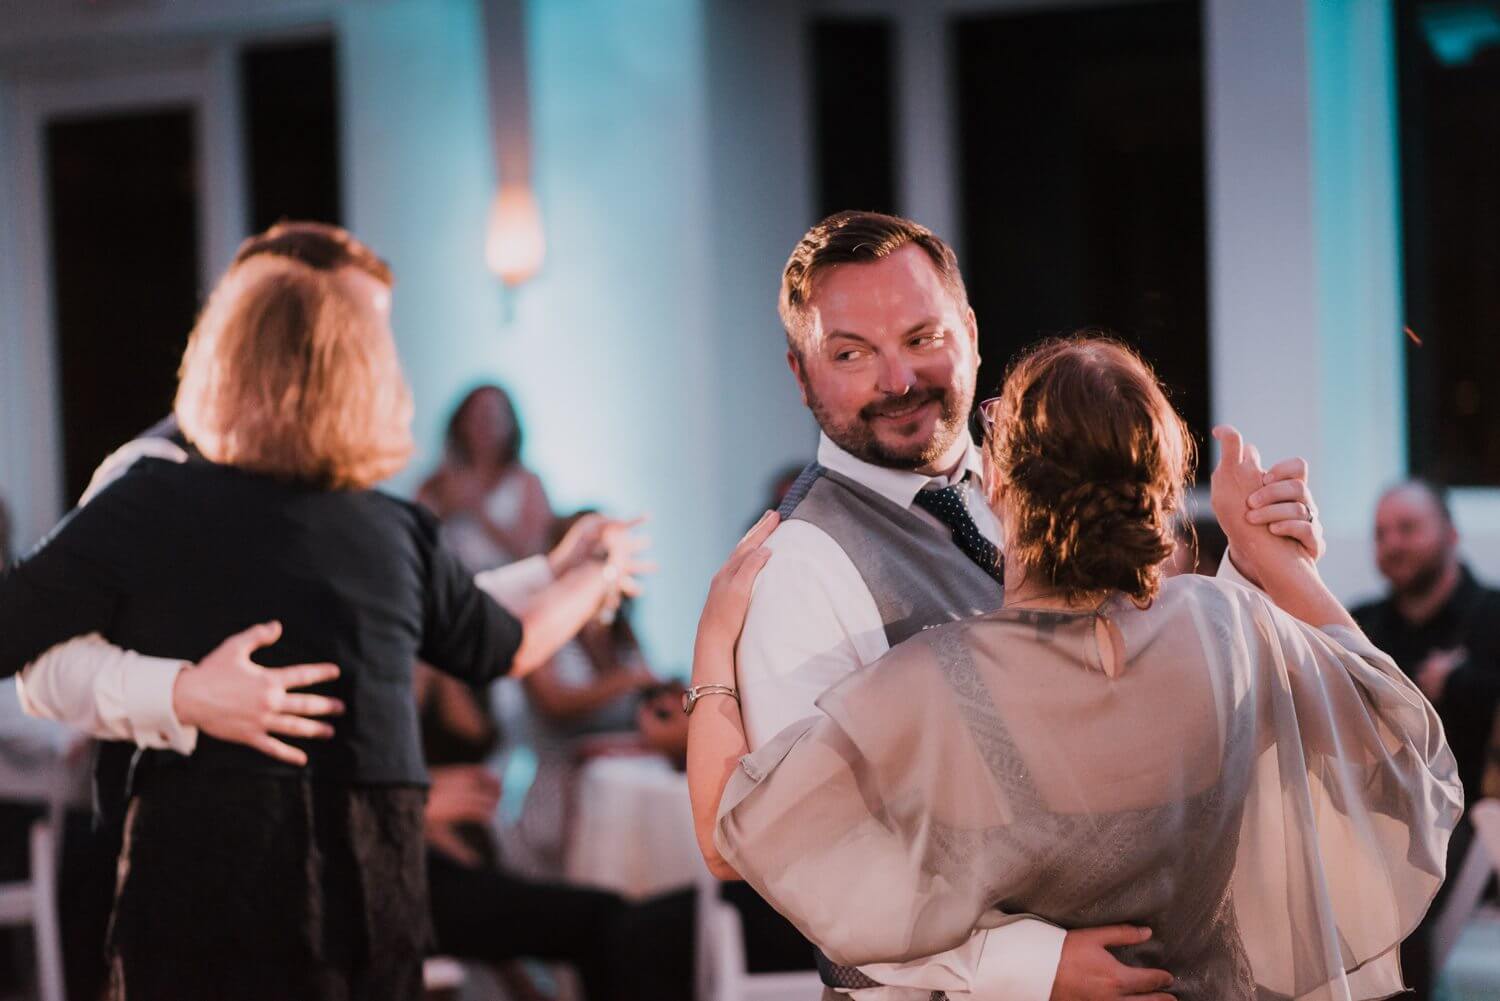 A man and woman dancing at a wedding reception at the Key West Hyatt Centric Resort.